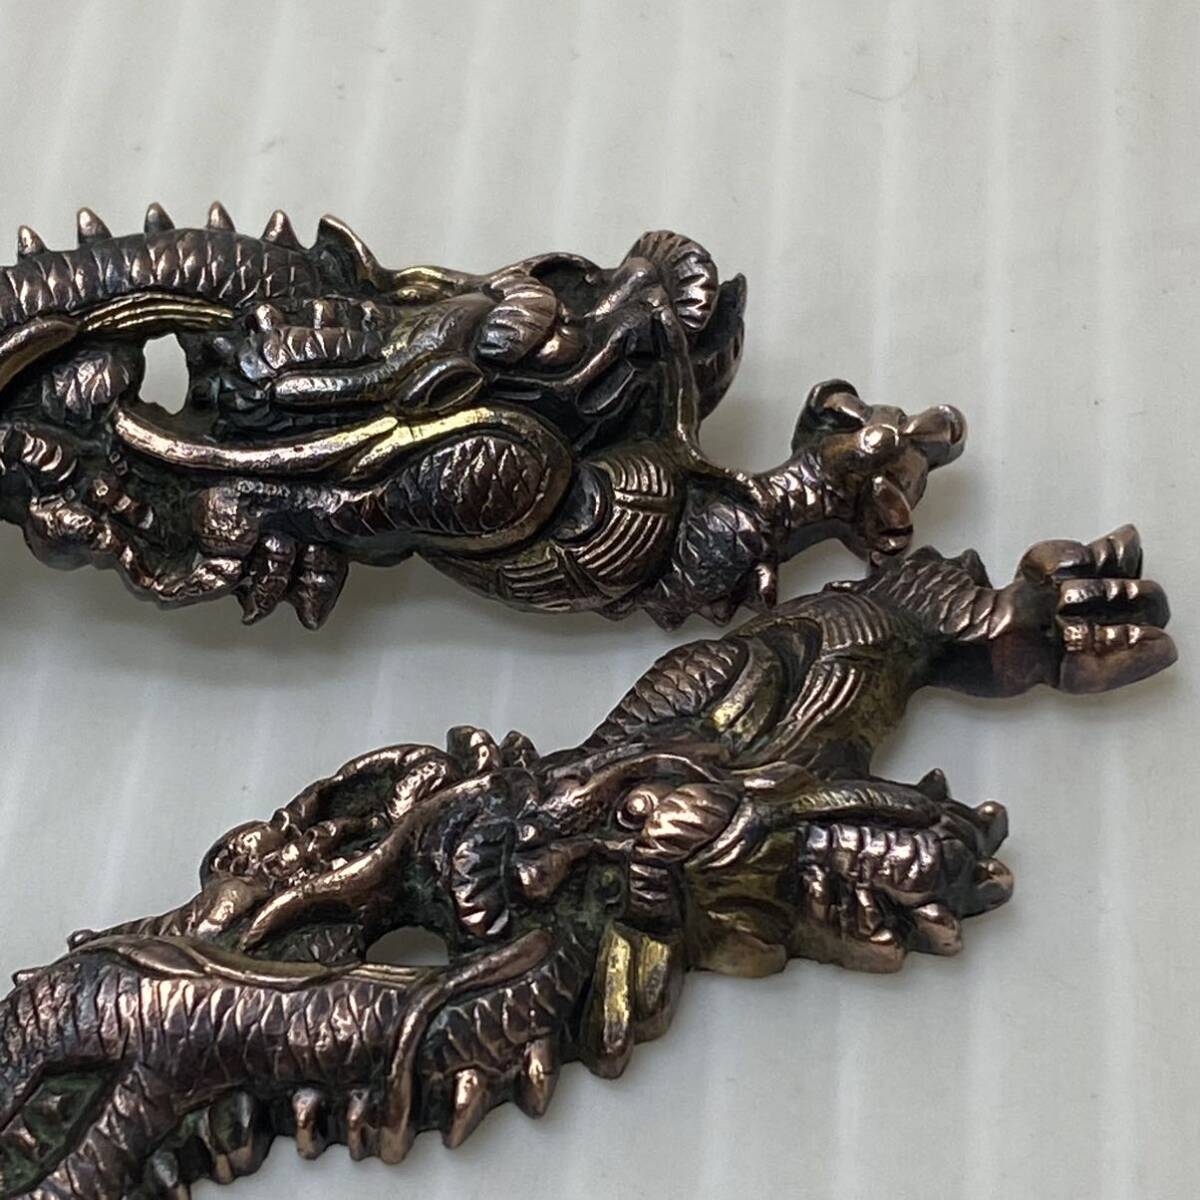  sword fittings eyes . less . dragon copper Japanese sword pattern gold . era thing antique antique Vintage collection 